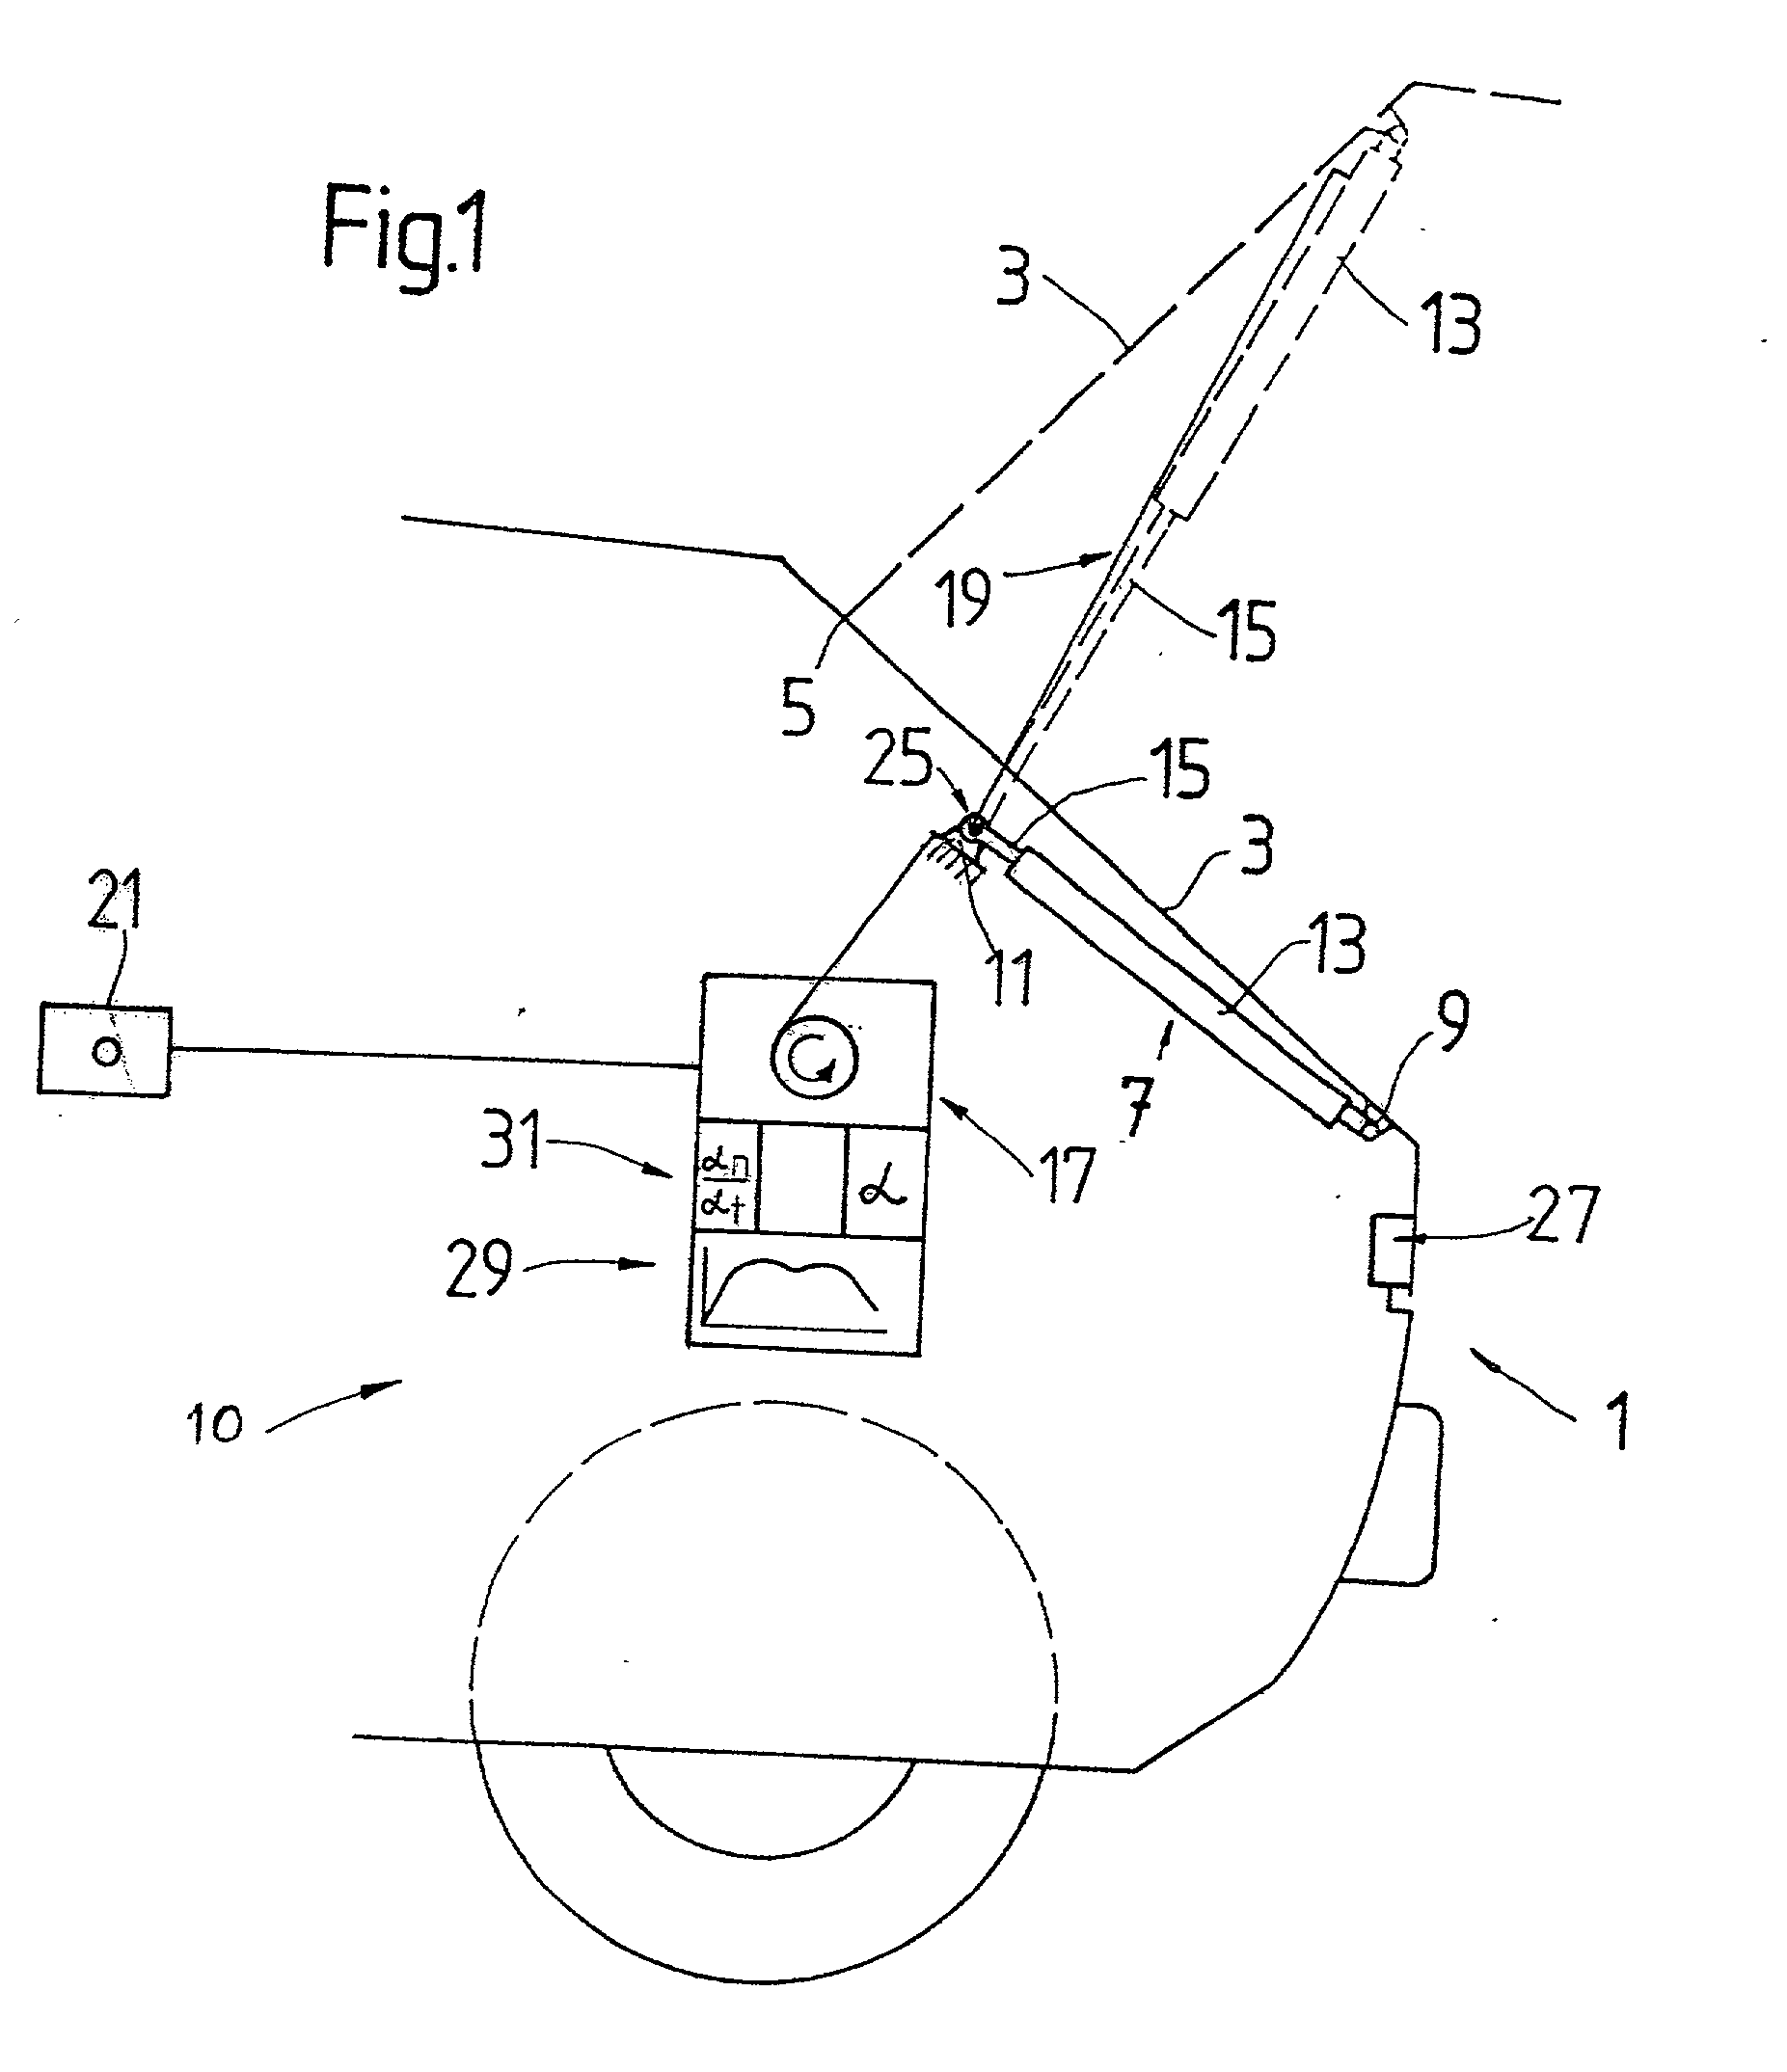 Actuating system comprising a piston-cylinder assembly together with a driving device